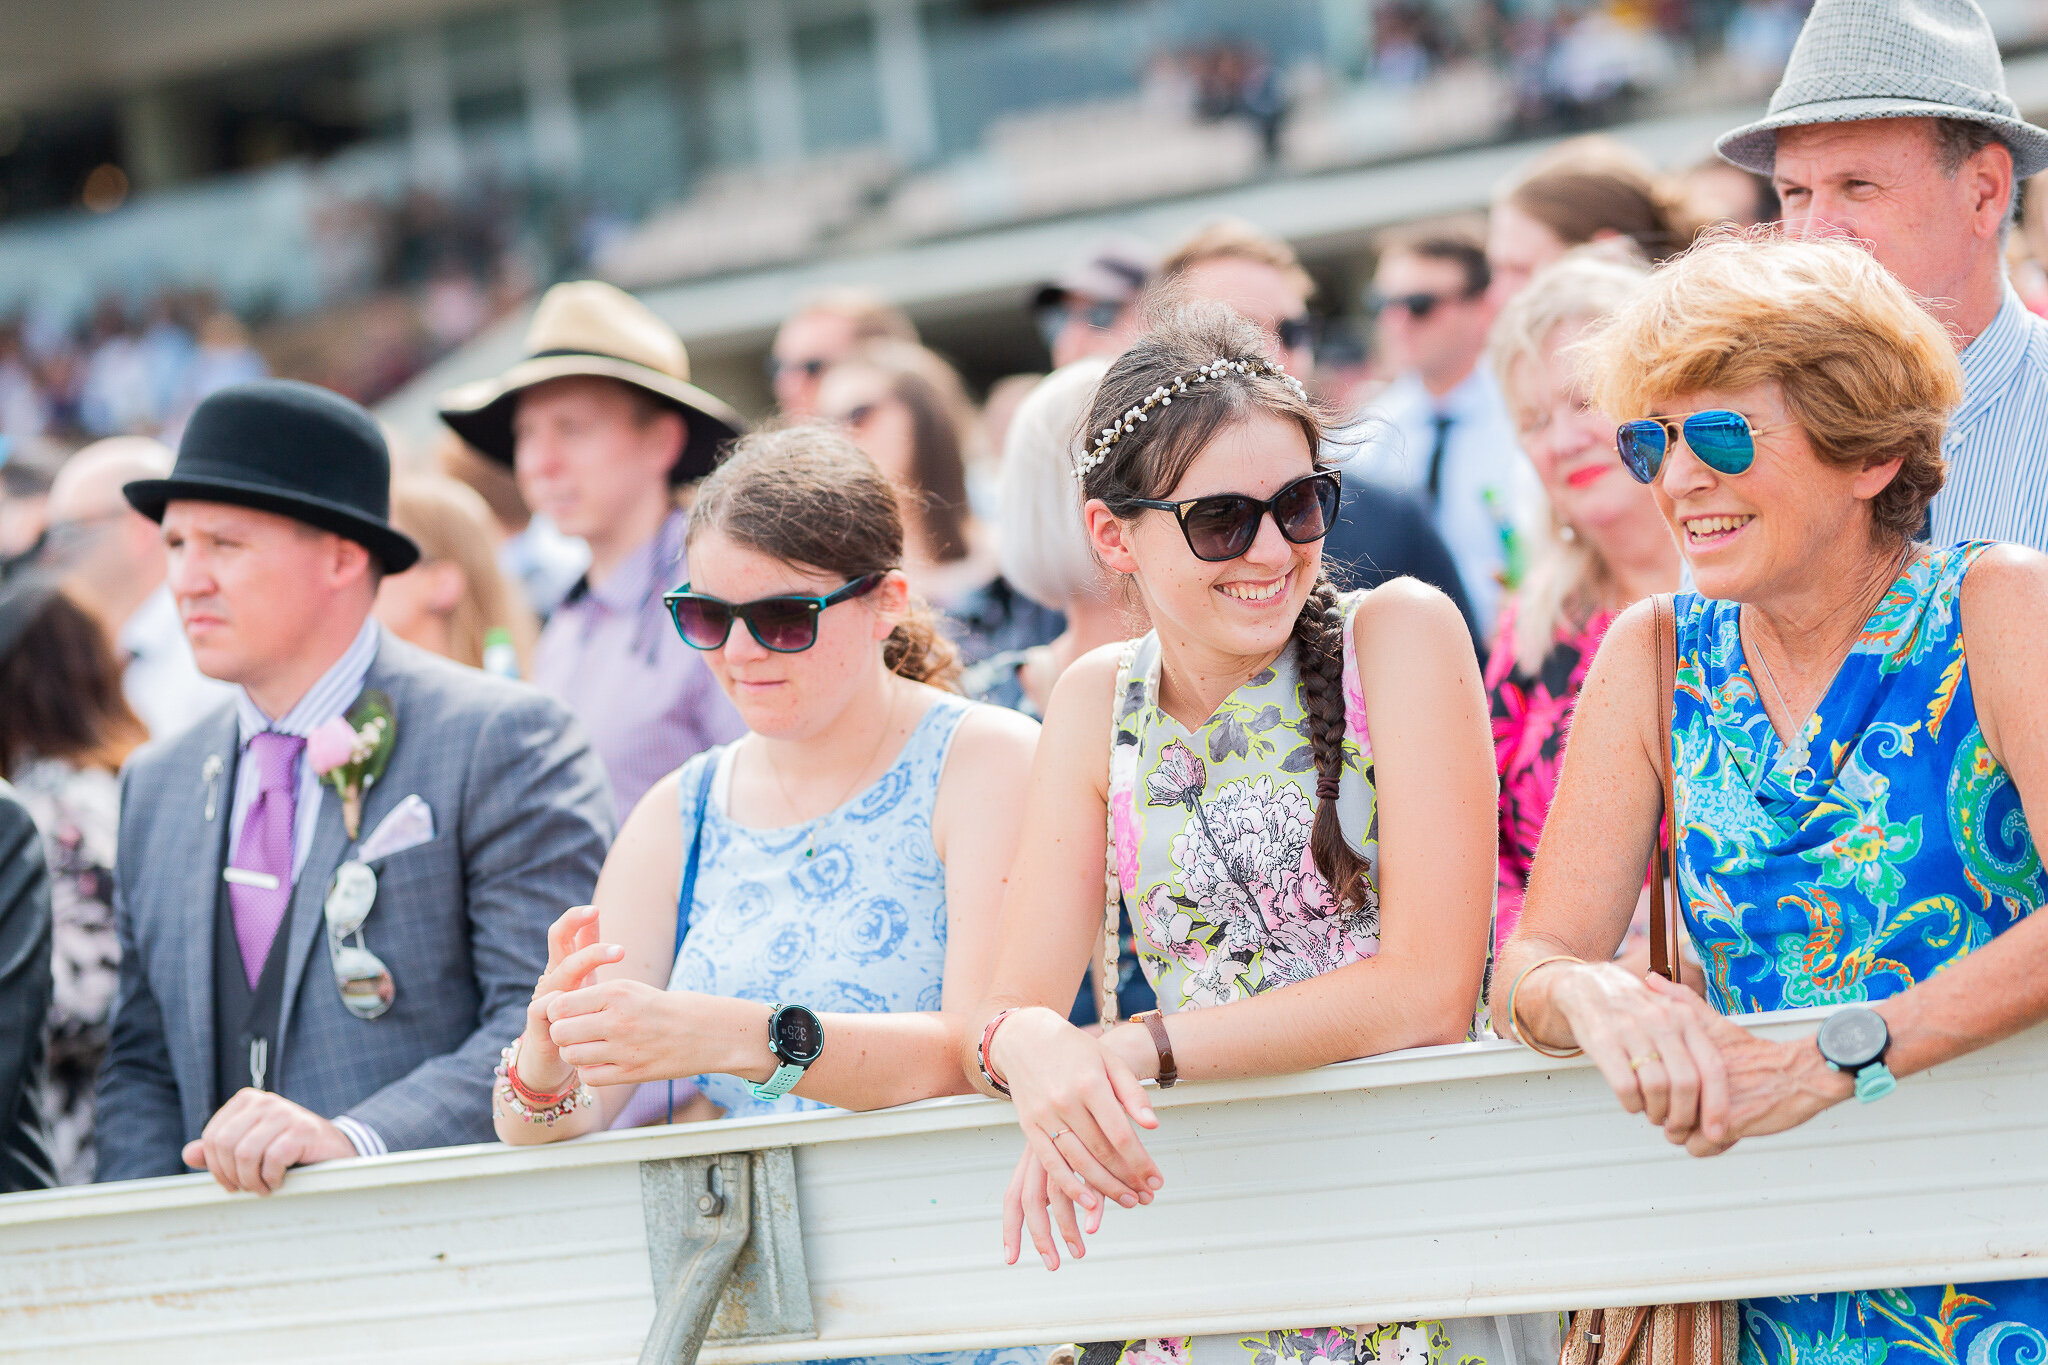 Canberra Event Photography - Well dressed spectators watching event